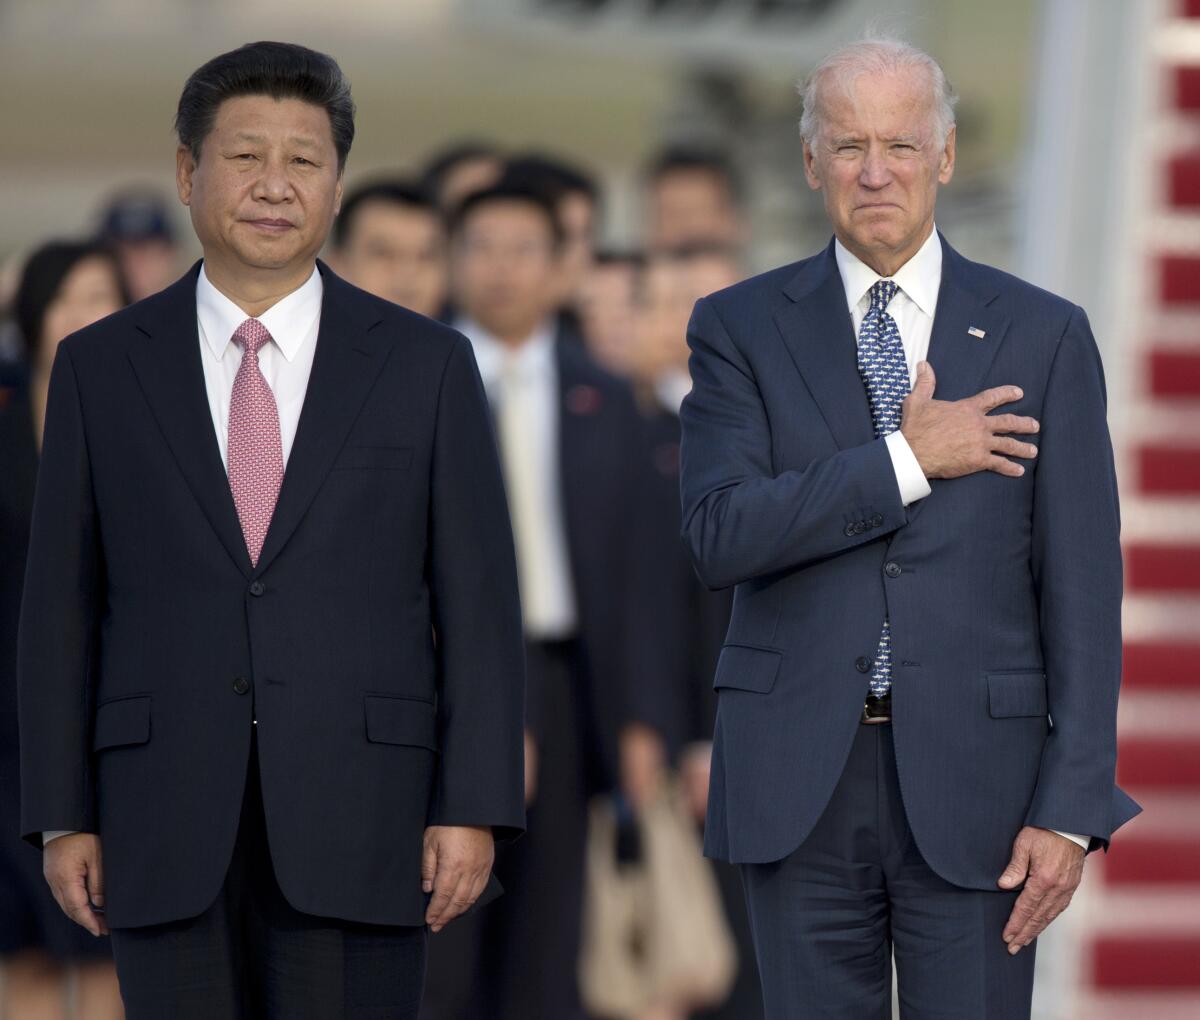 Chinese President Xi Jinping and President Joe Biden, then vice president, at Andrews Air Force Base, Md. in September 2015.